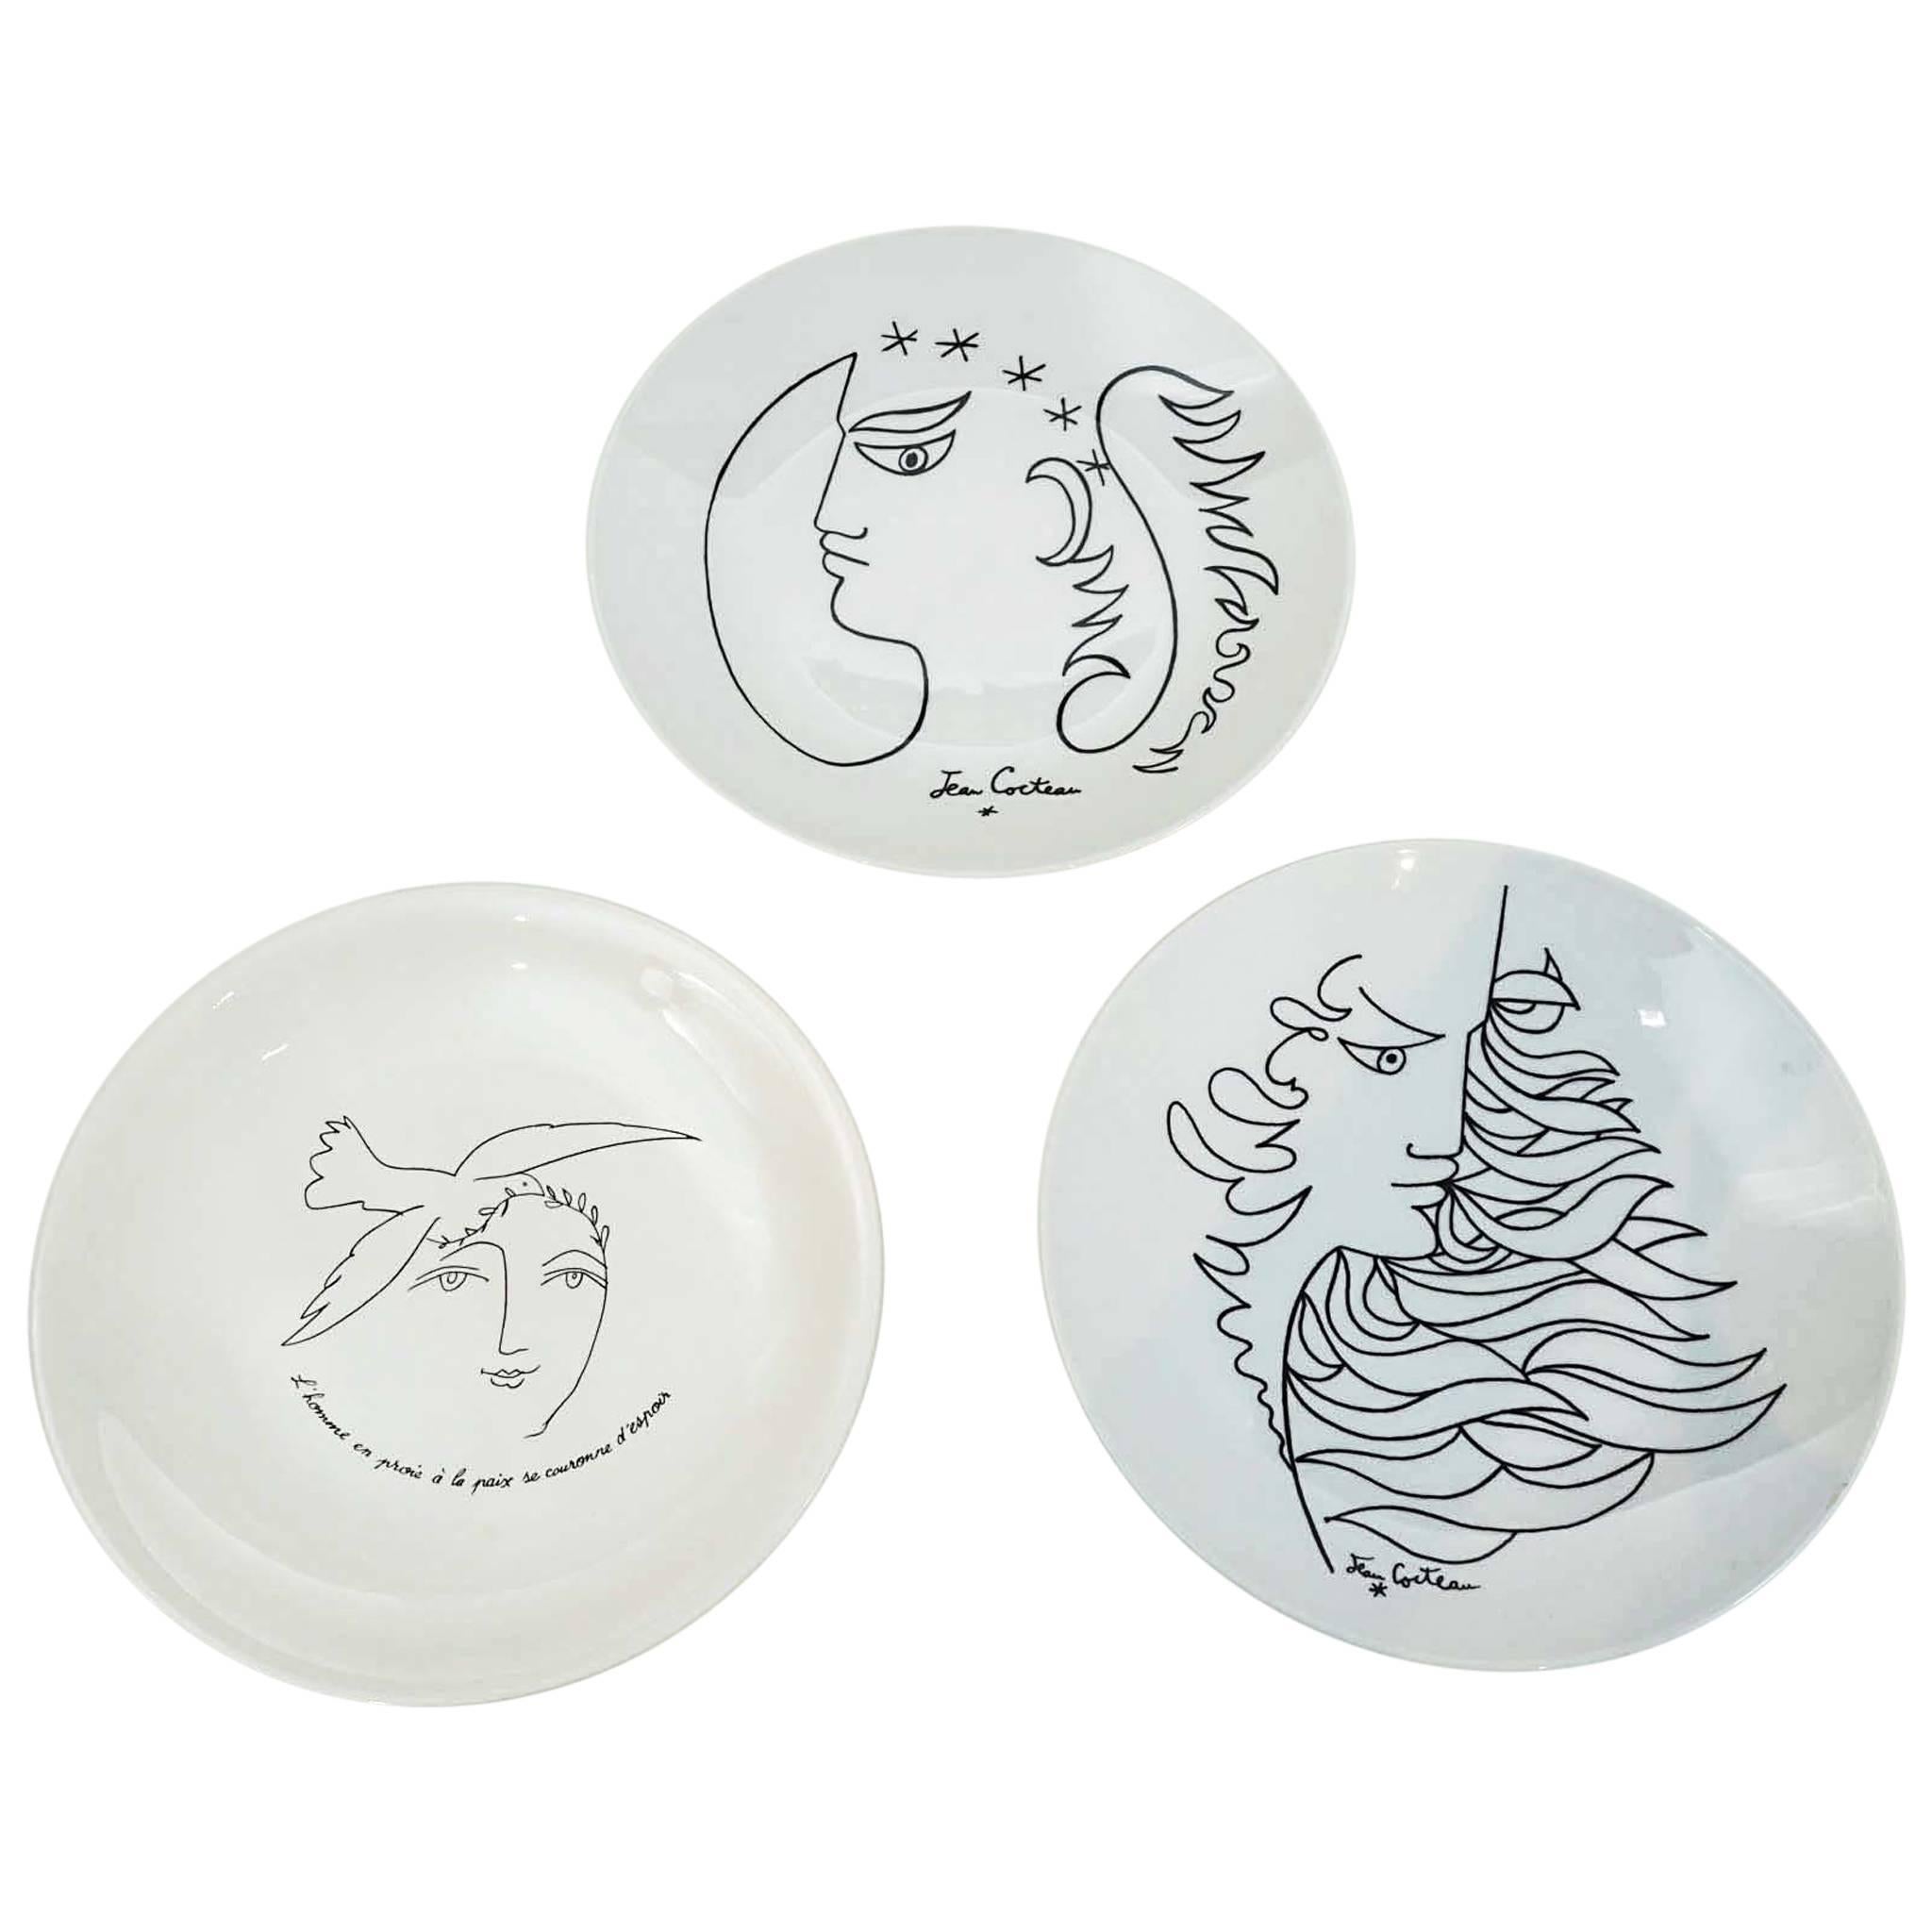 Jean Cocteau Plates  by Promo Ceram and Picasso Plate by ECPLP